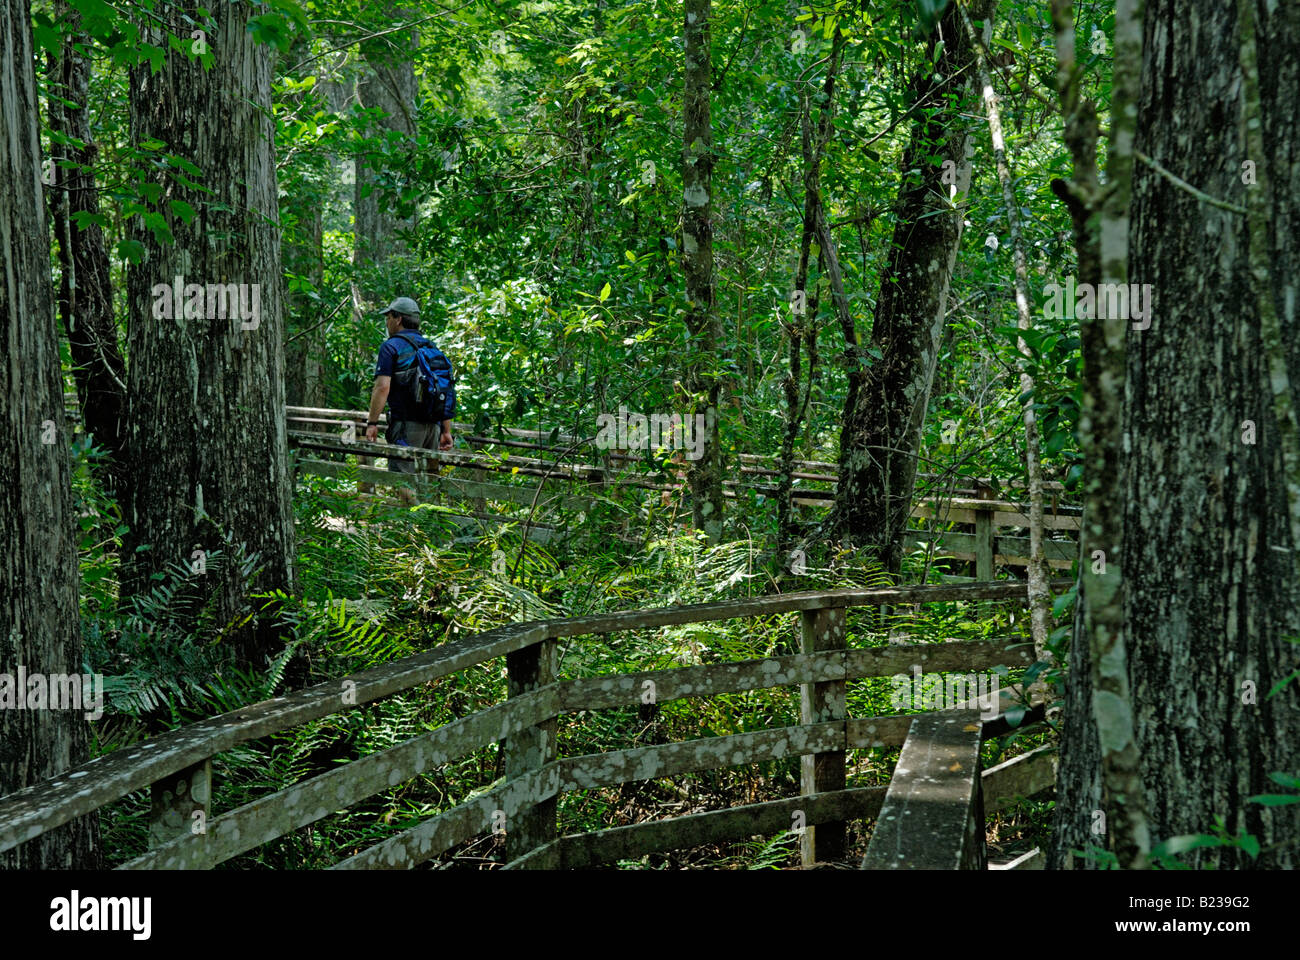 Man walking on a boardwalk nature trail through a forest of old growth bald cypresses  Corkscrew Swamp Audubon Sanctuary Stock Photo